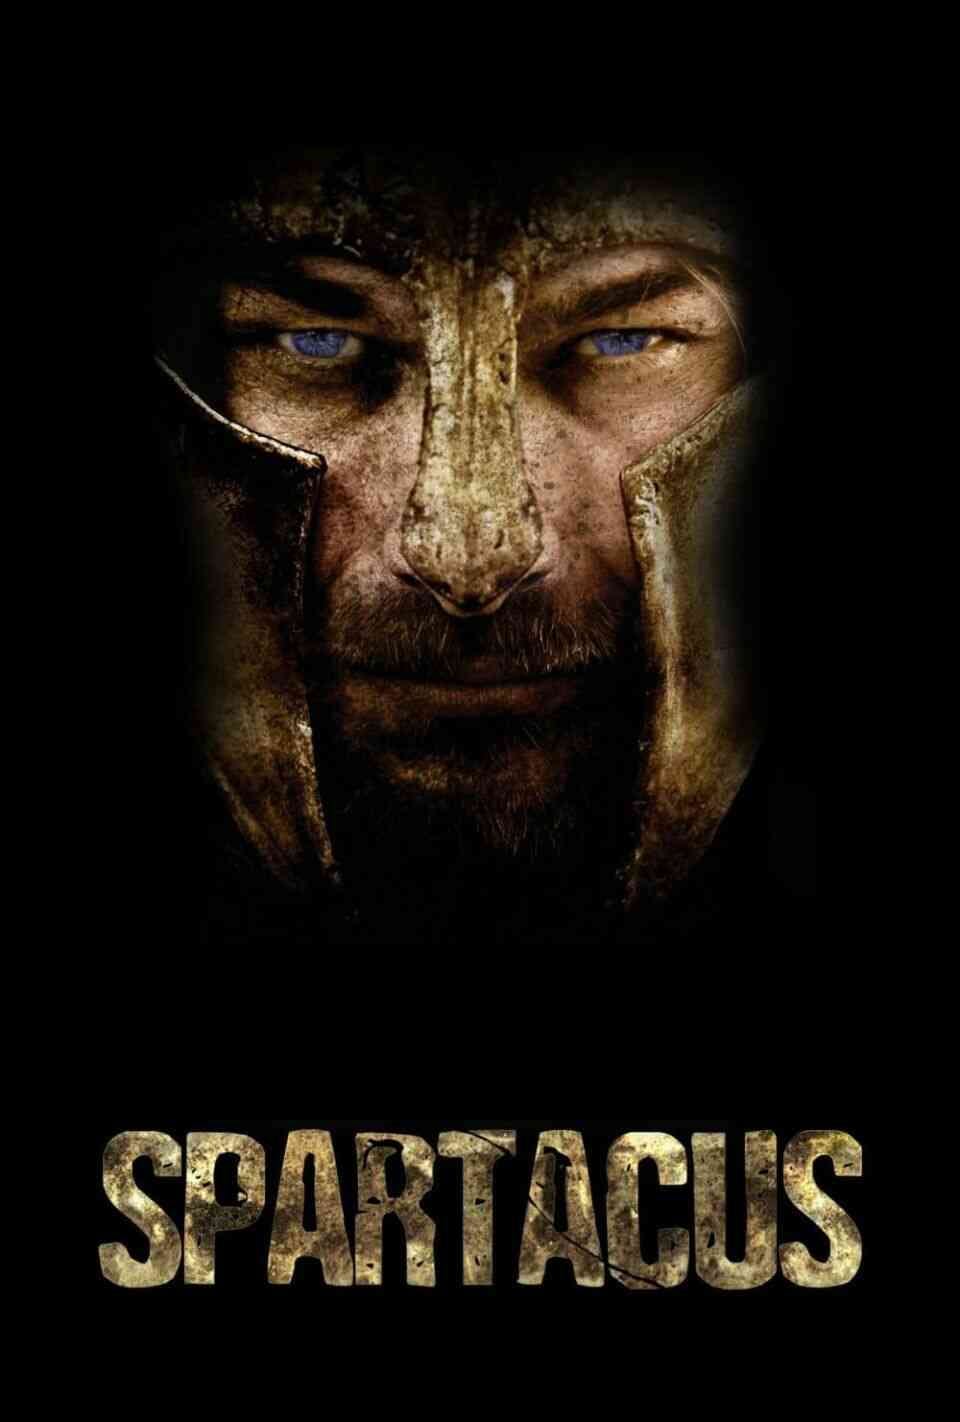 Read Spartacus screenplay (poster)